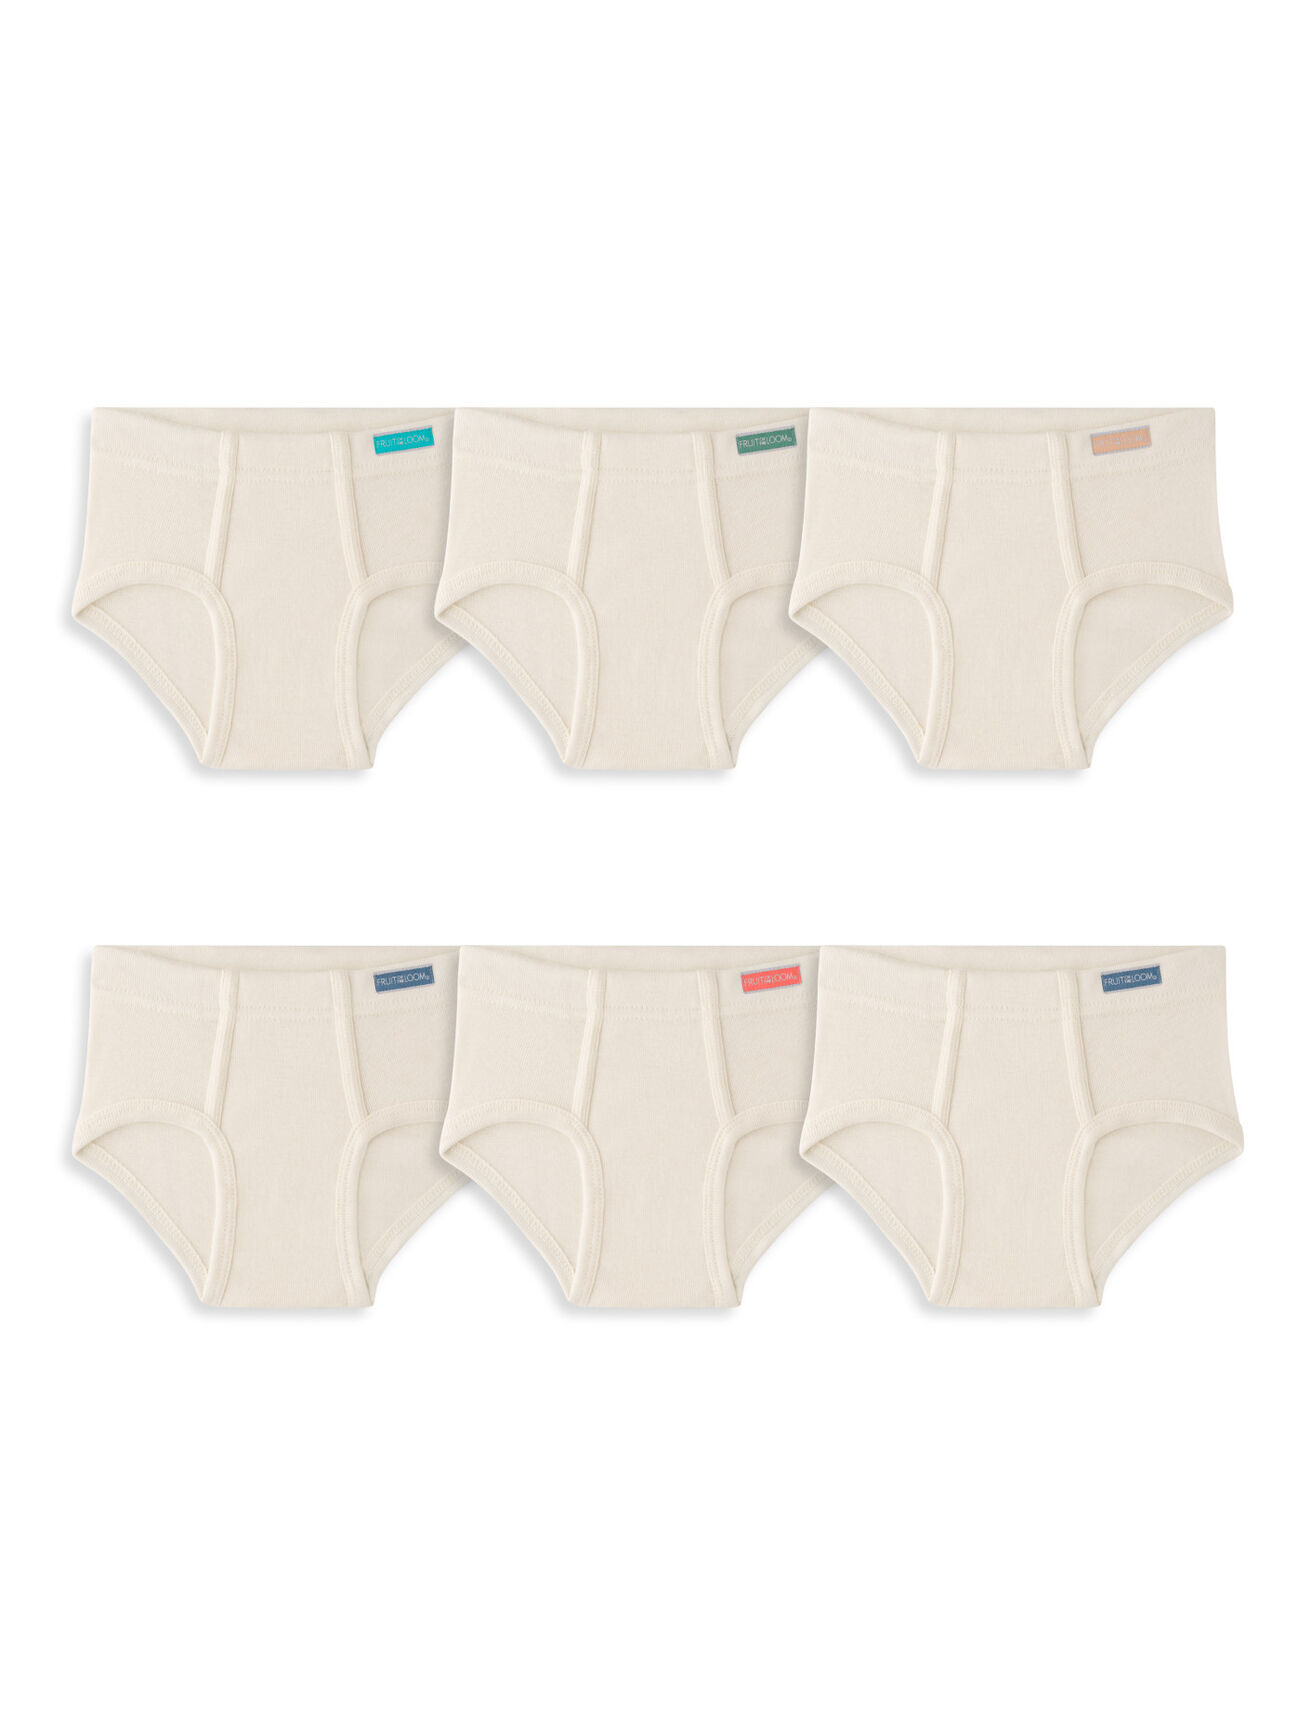 Toddler Boys' Natural Cotton Briefs, 6 Pack